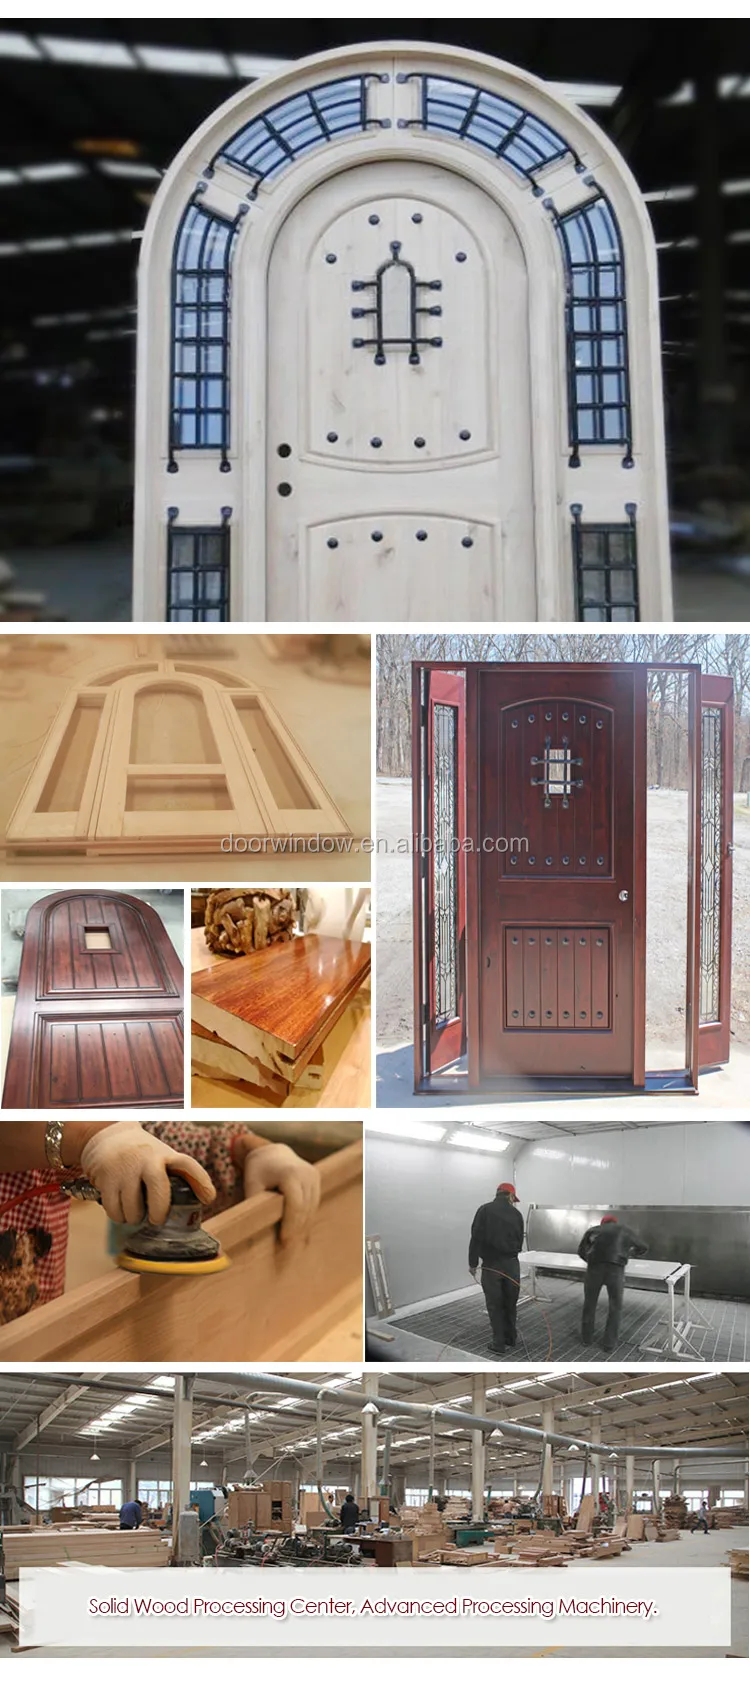 2020 Customized Latest Design Double Glaze wood frame Top hung solid wood entry door